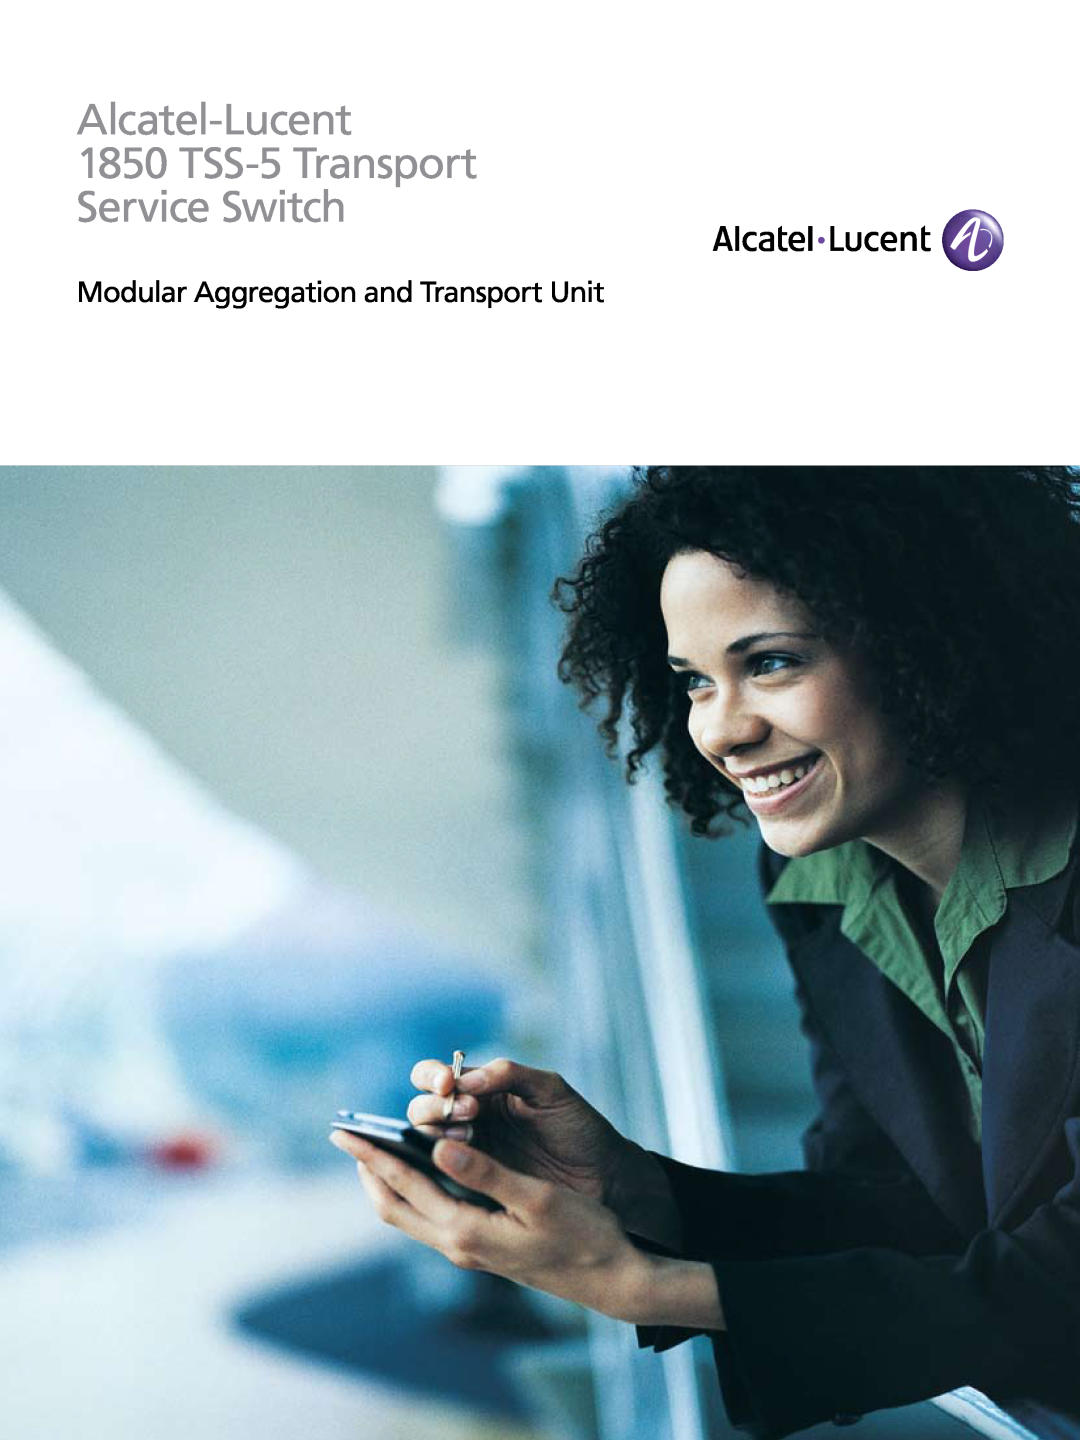 Alcatel-Lucent manual Alcatel-Lucent 1850 TSS-5 Transport Service Switch, Modular Aggregation and Transport Unit 